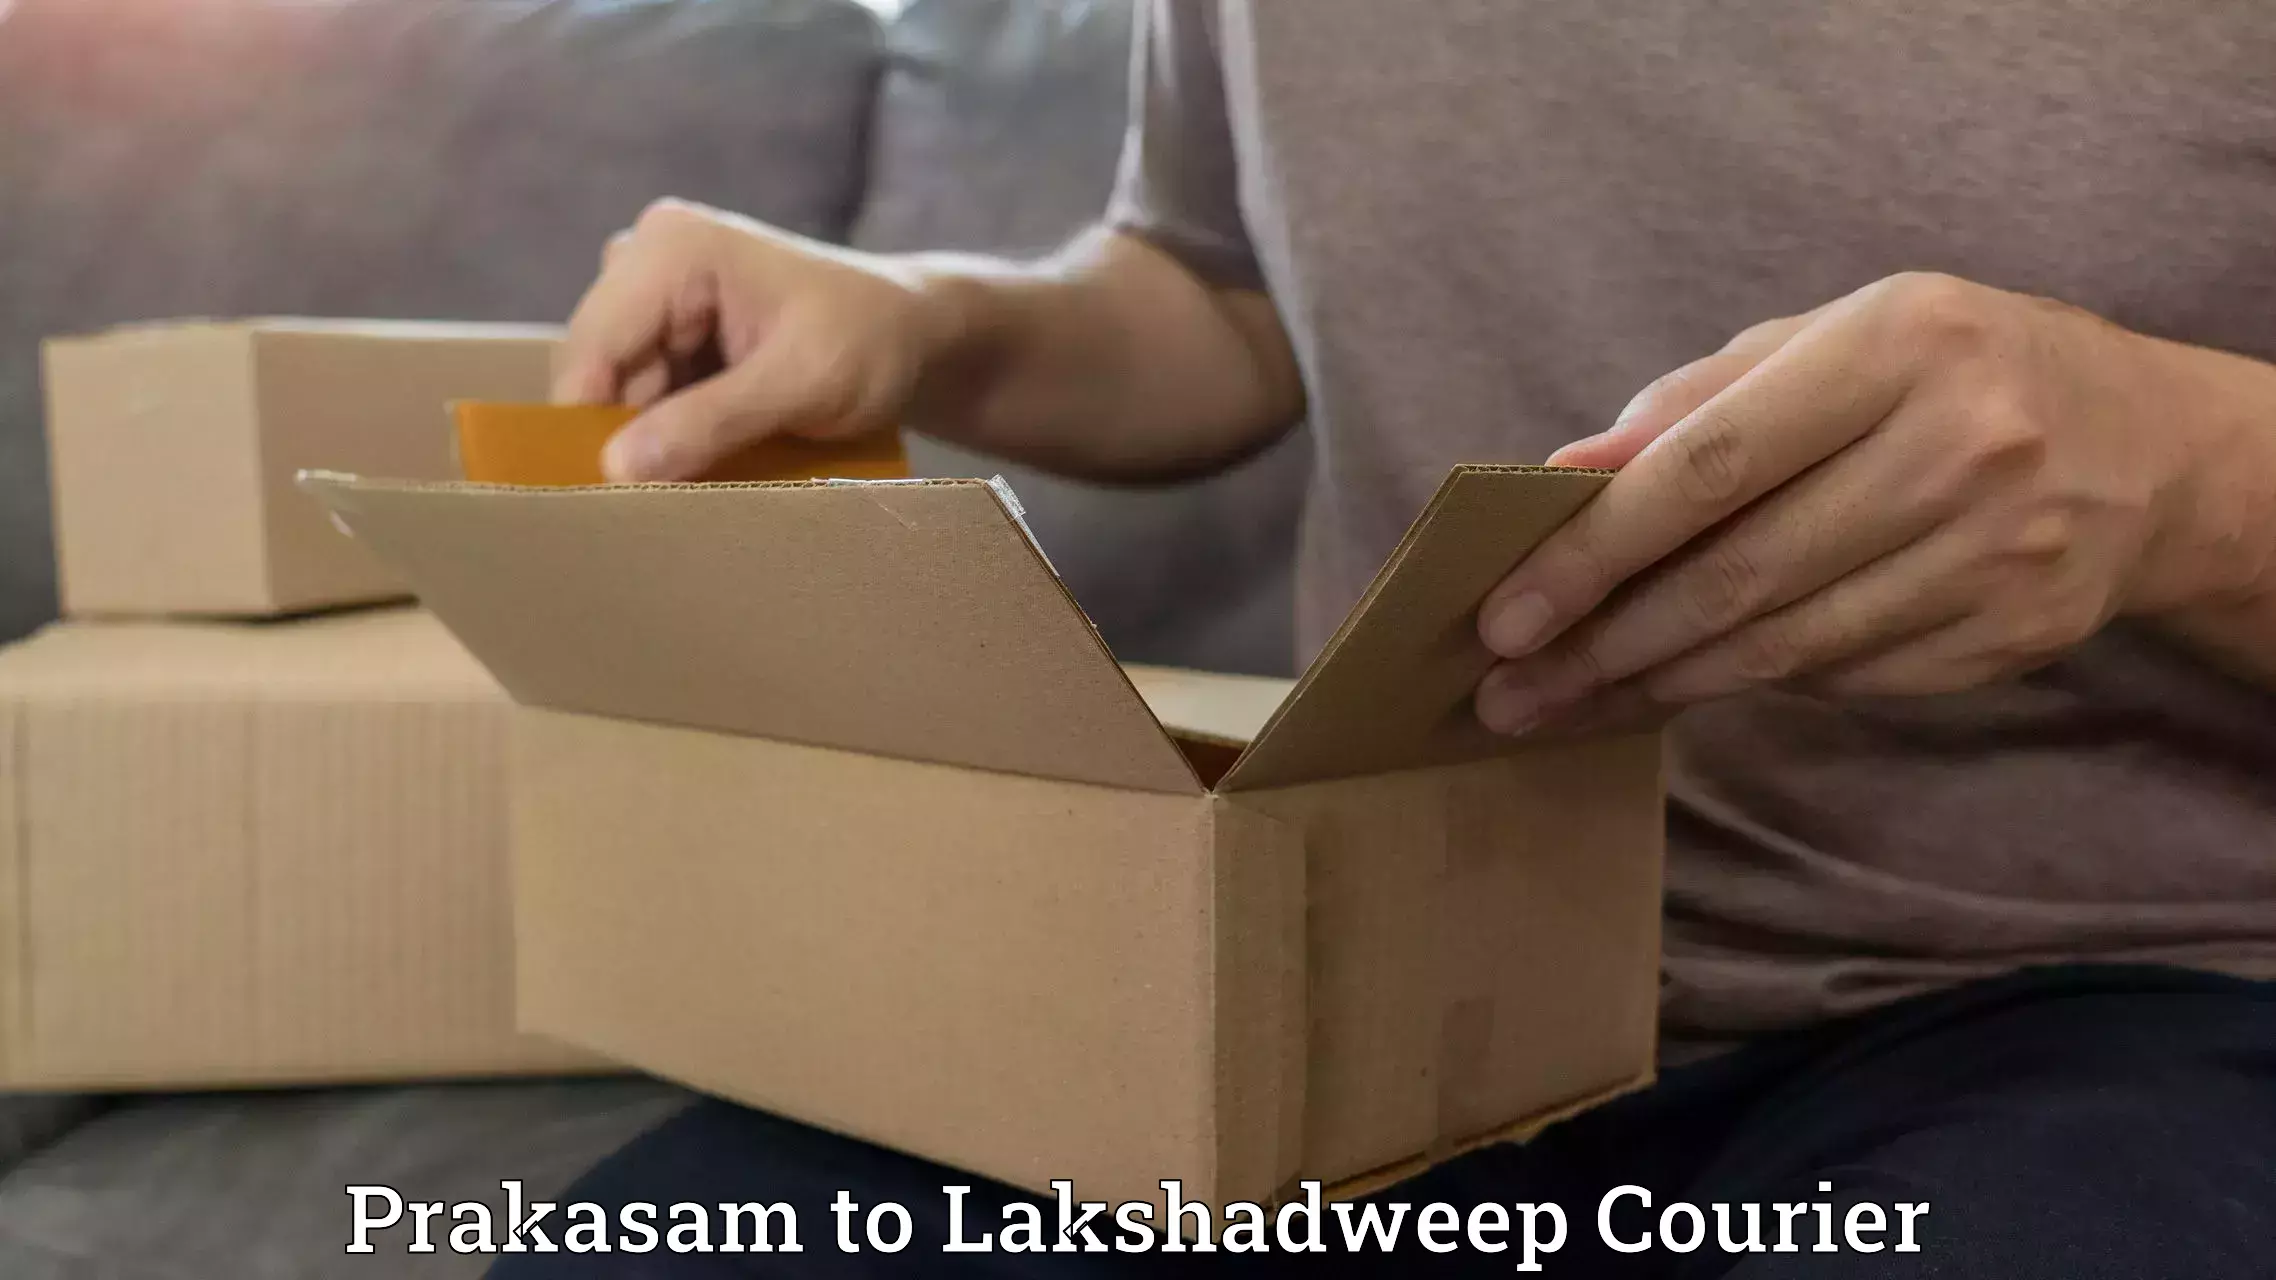 Easy access courier services Prakasam to Lakshadweep